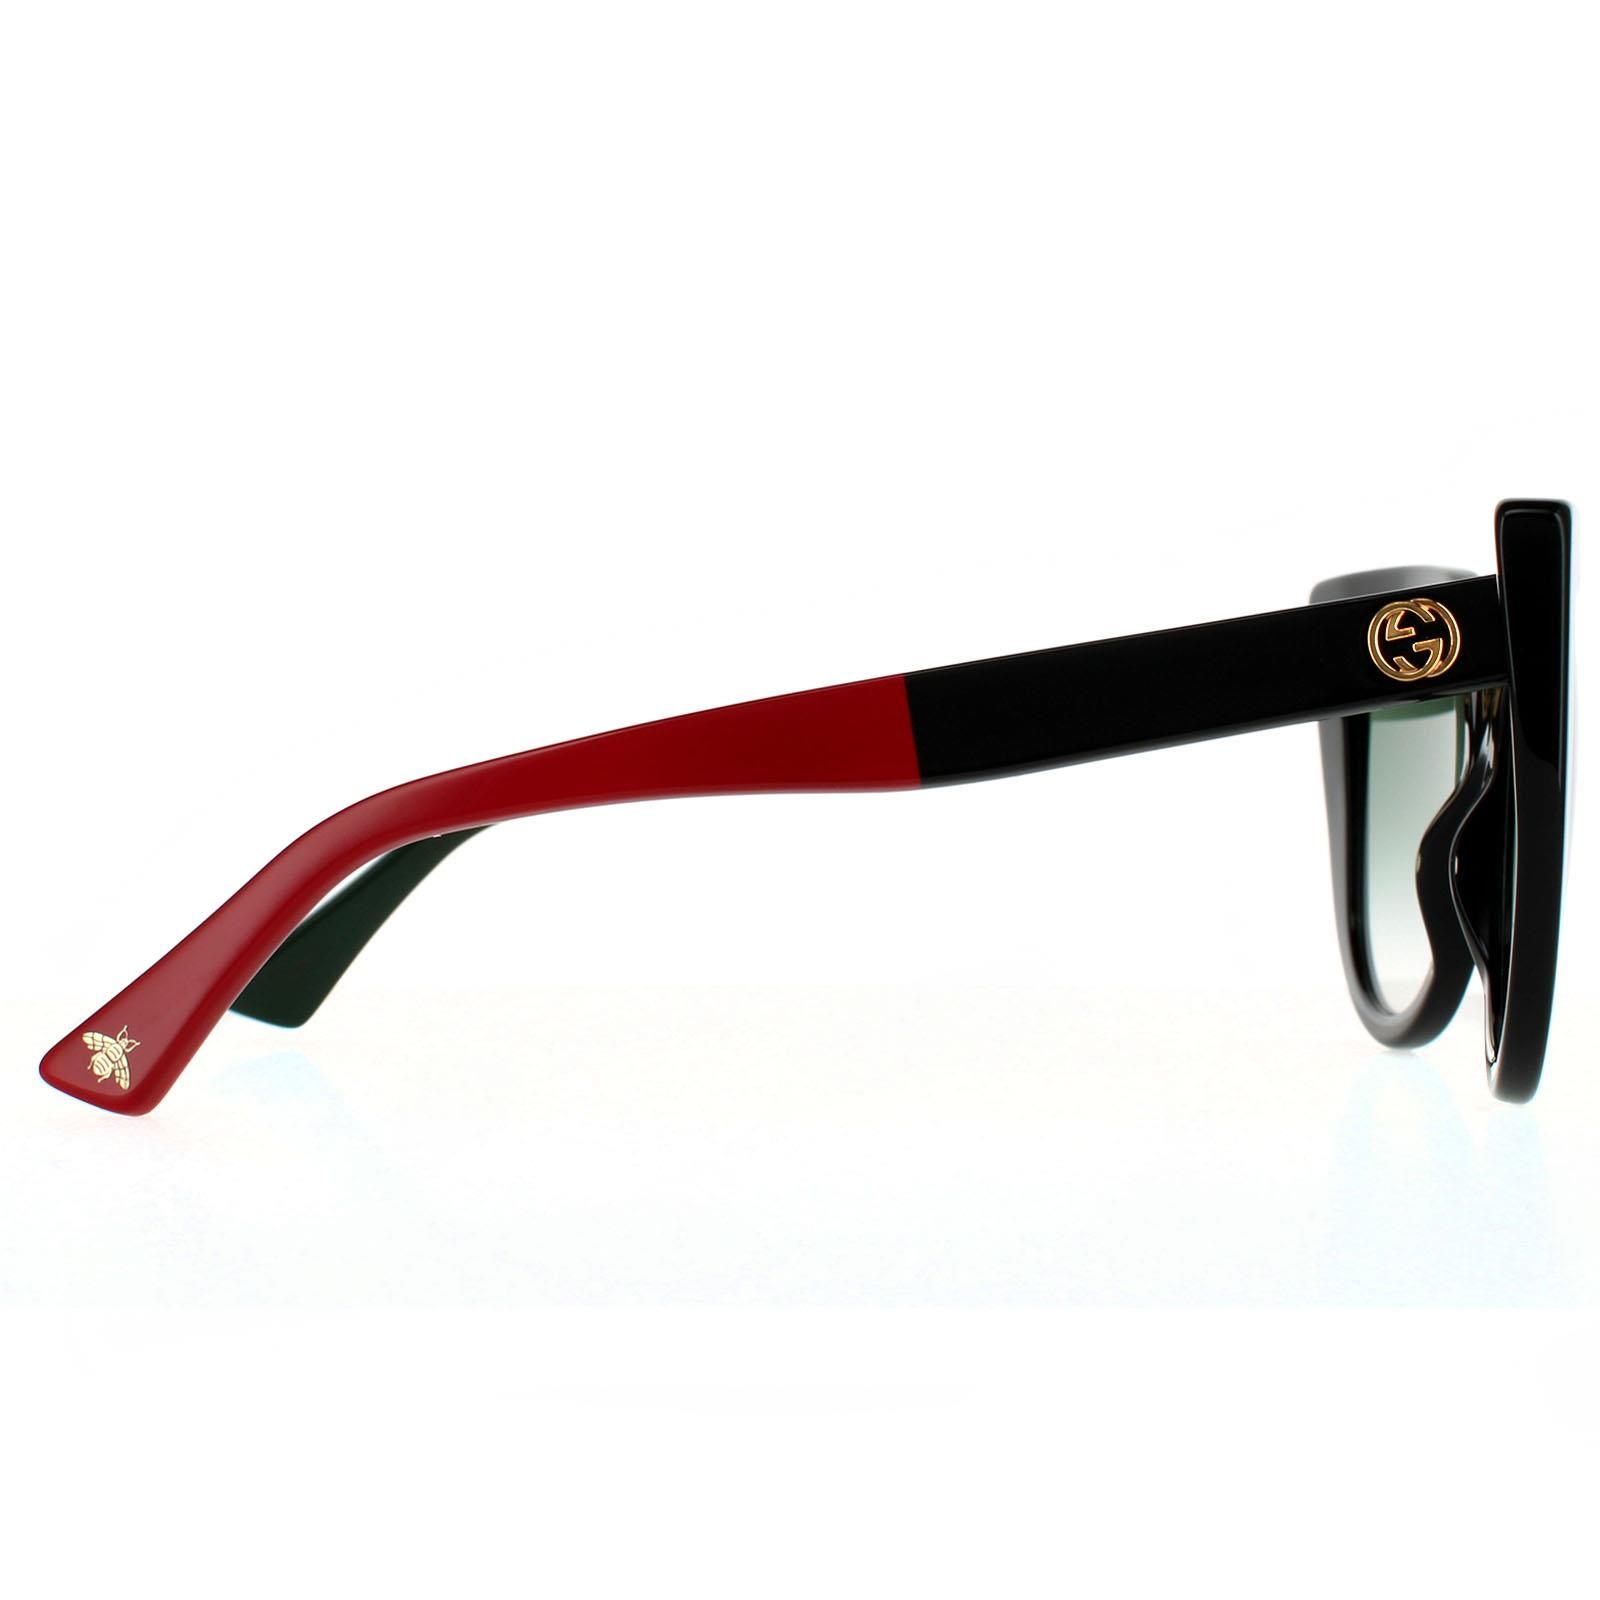 Gucci Cat Eye Womens Black With Red and Green Green Gradient  Sunglasses Gucci are a gorgeous cat eye style crafted from chunky acetate embellished with a metal interlocking GG logo next to the hinges and bumblebee at the tip.